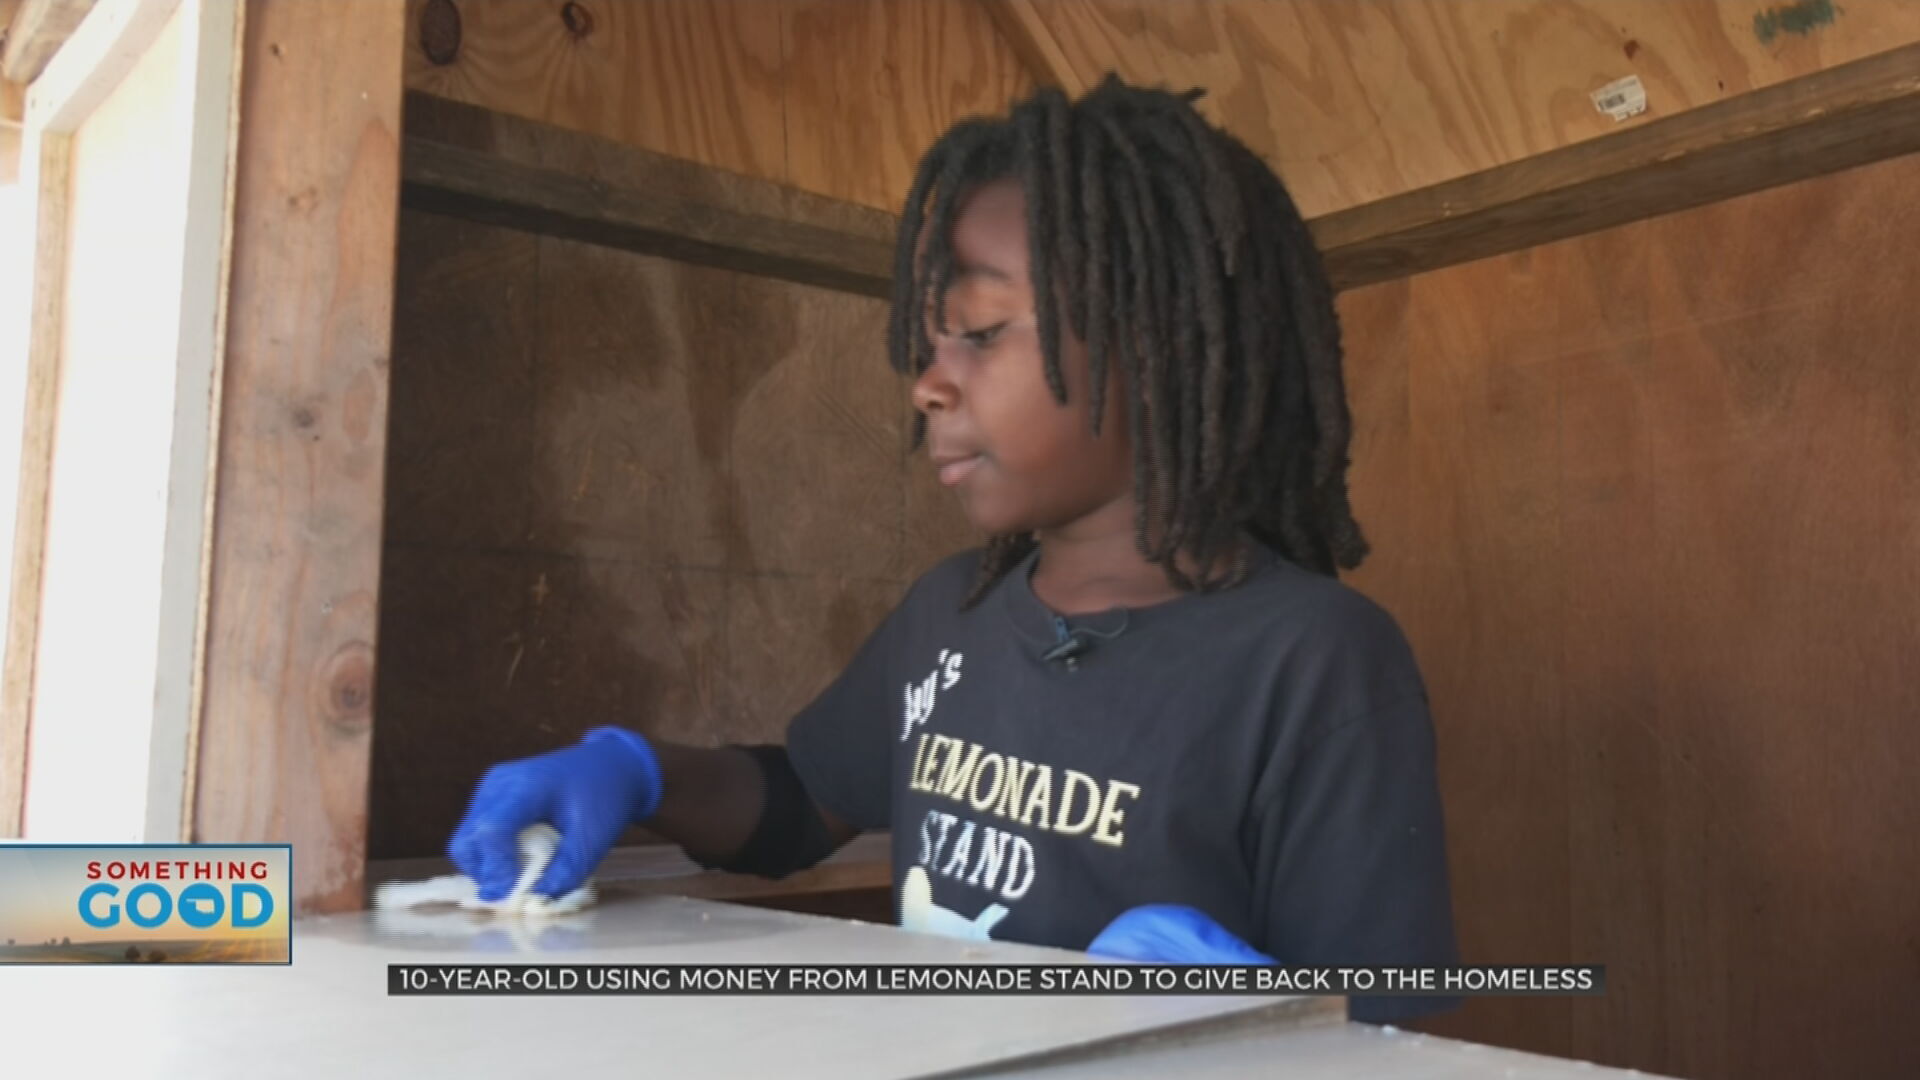 Tulsa 10-Year-Old Donates Lemonade Stand Sales To Homeless In Need